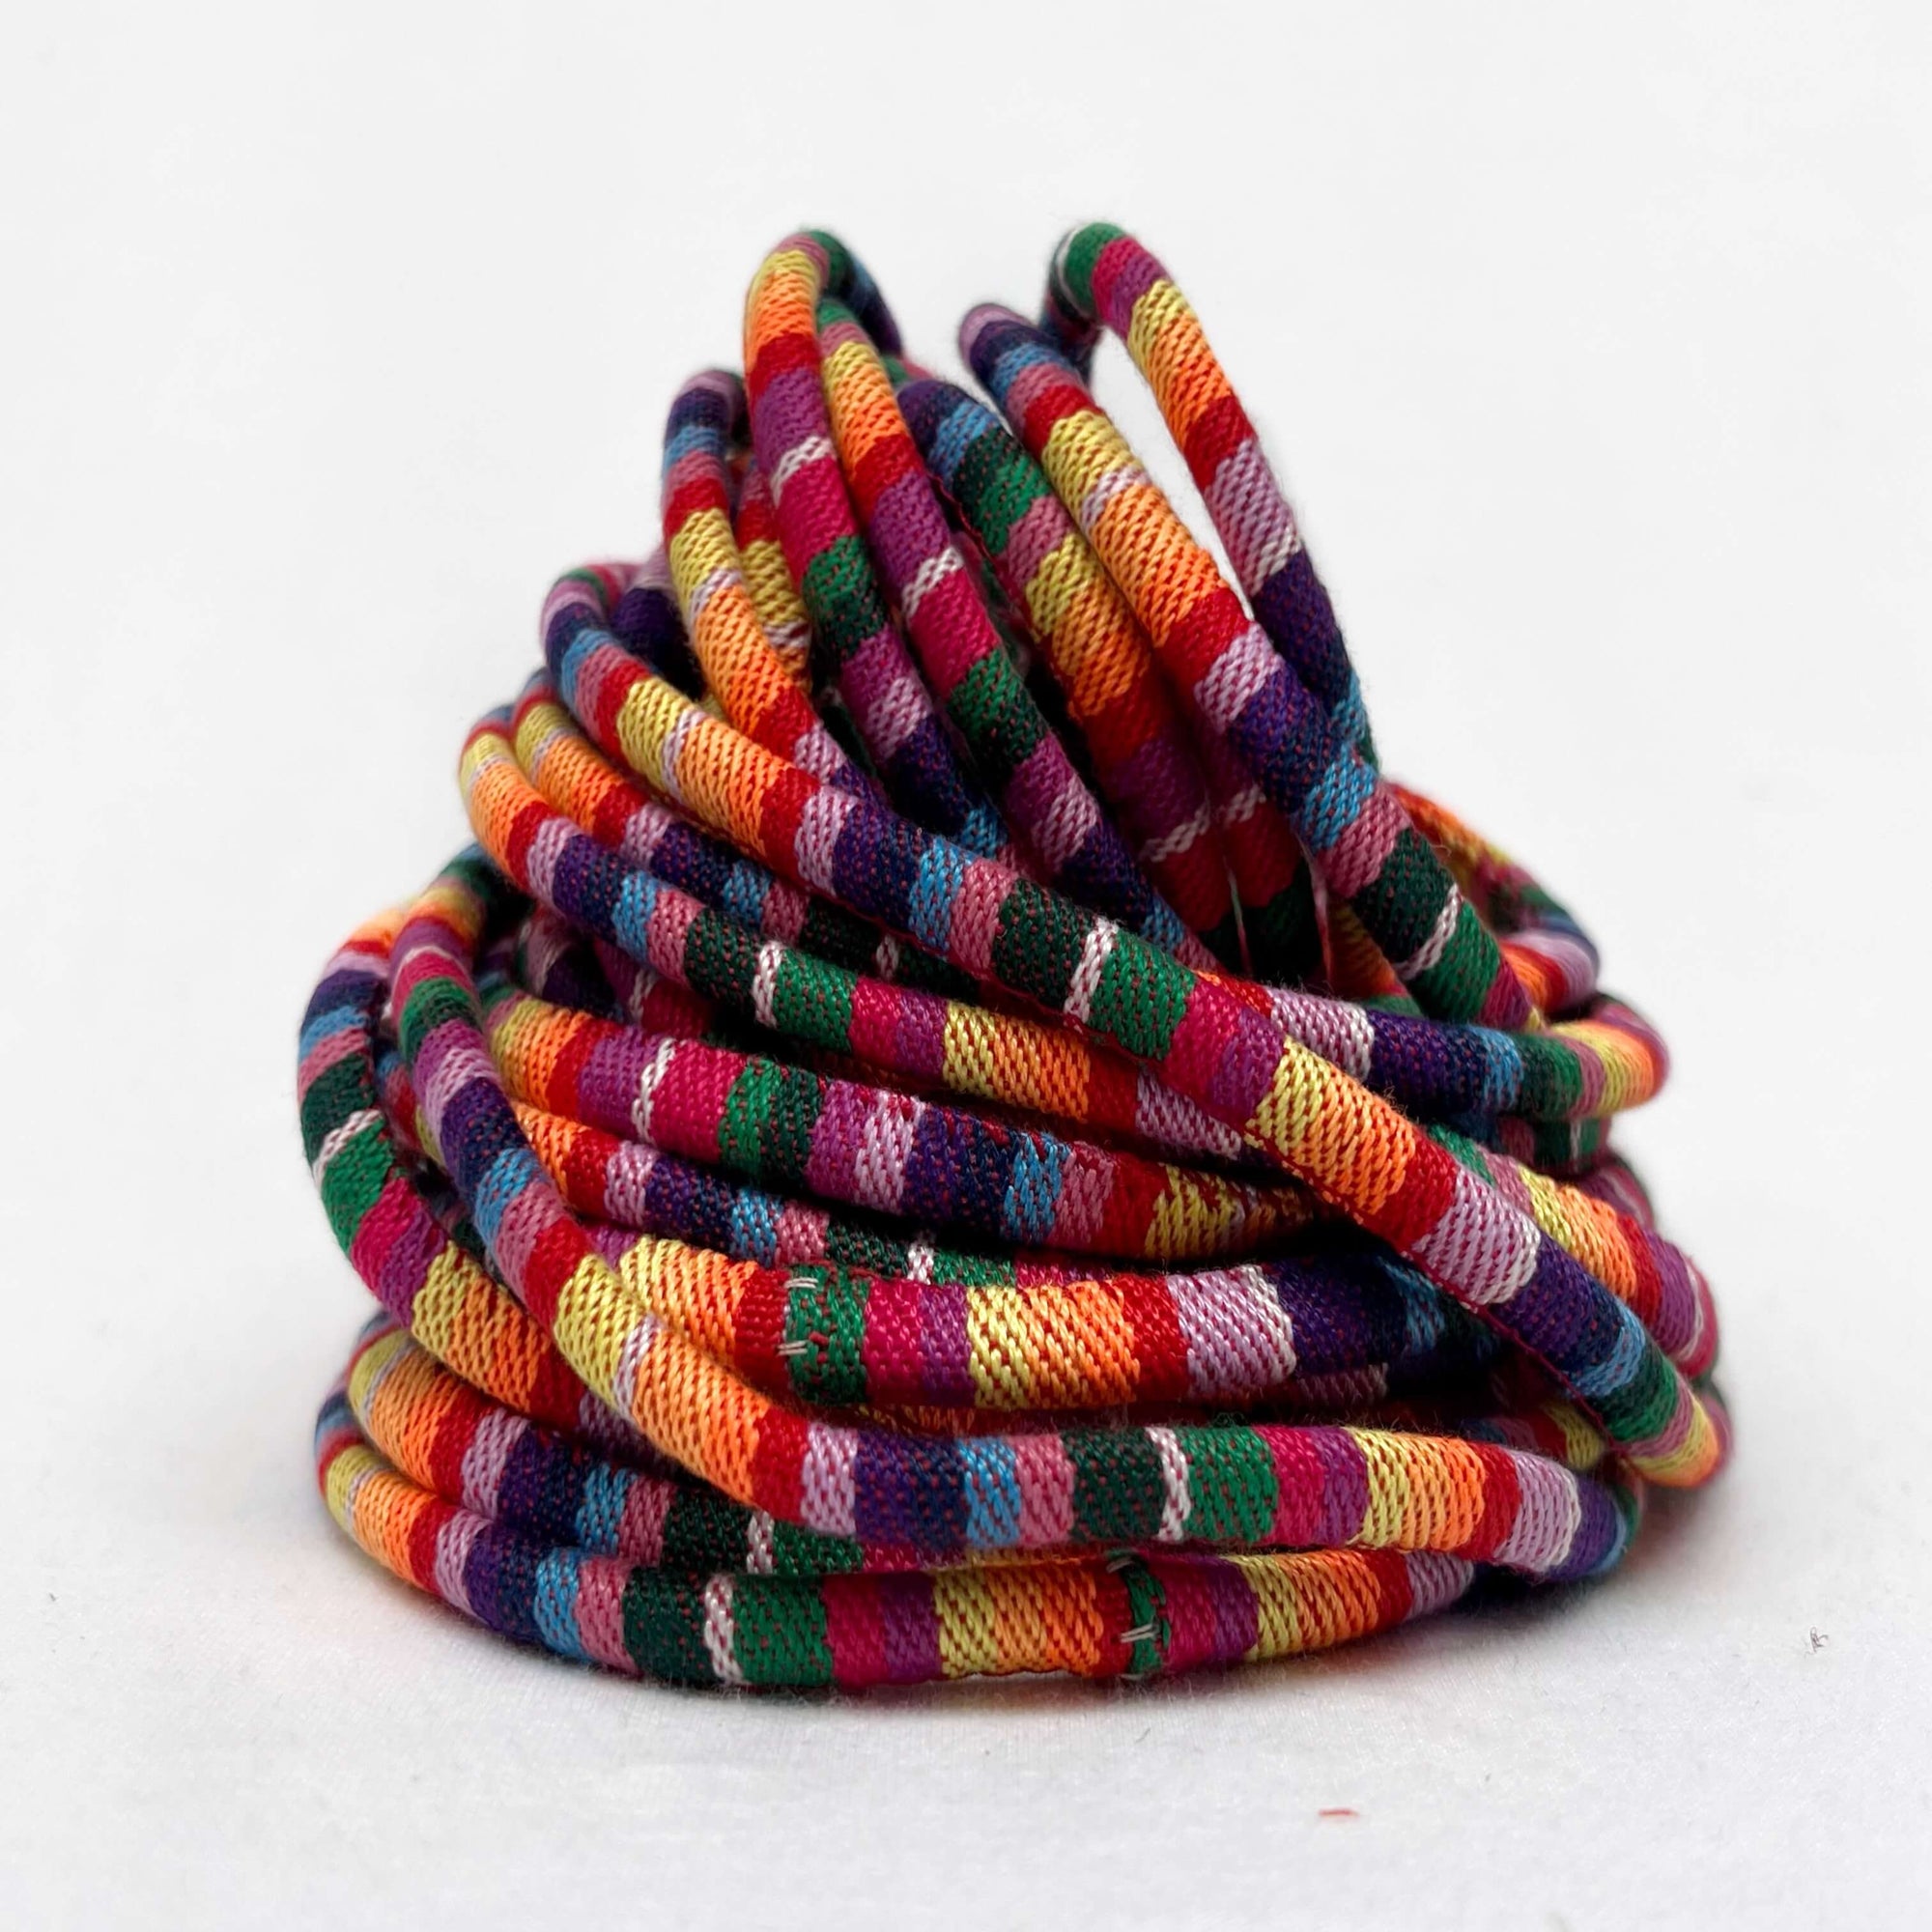 festival coloured woven cord on white background for display